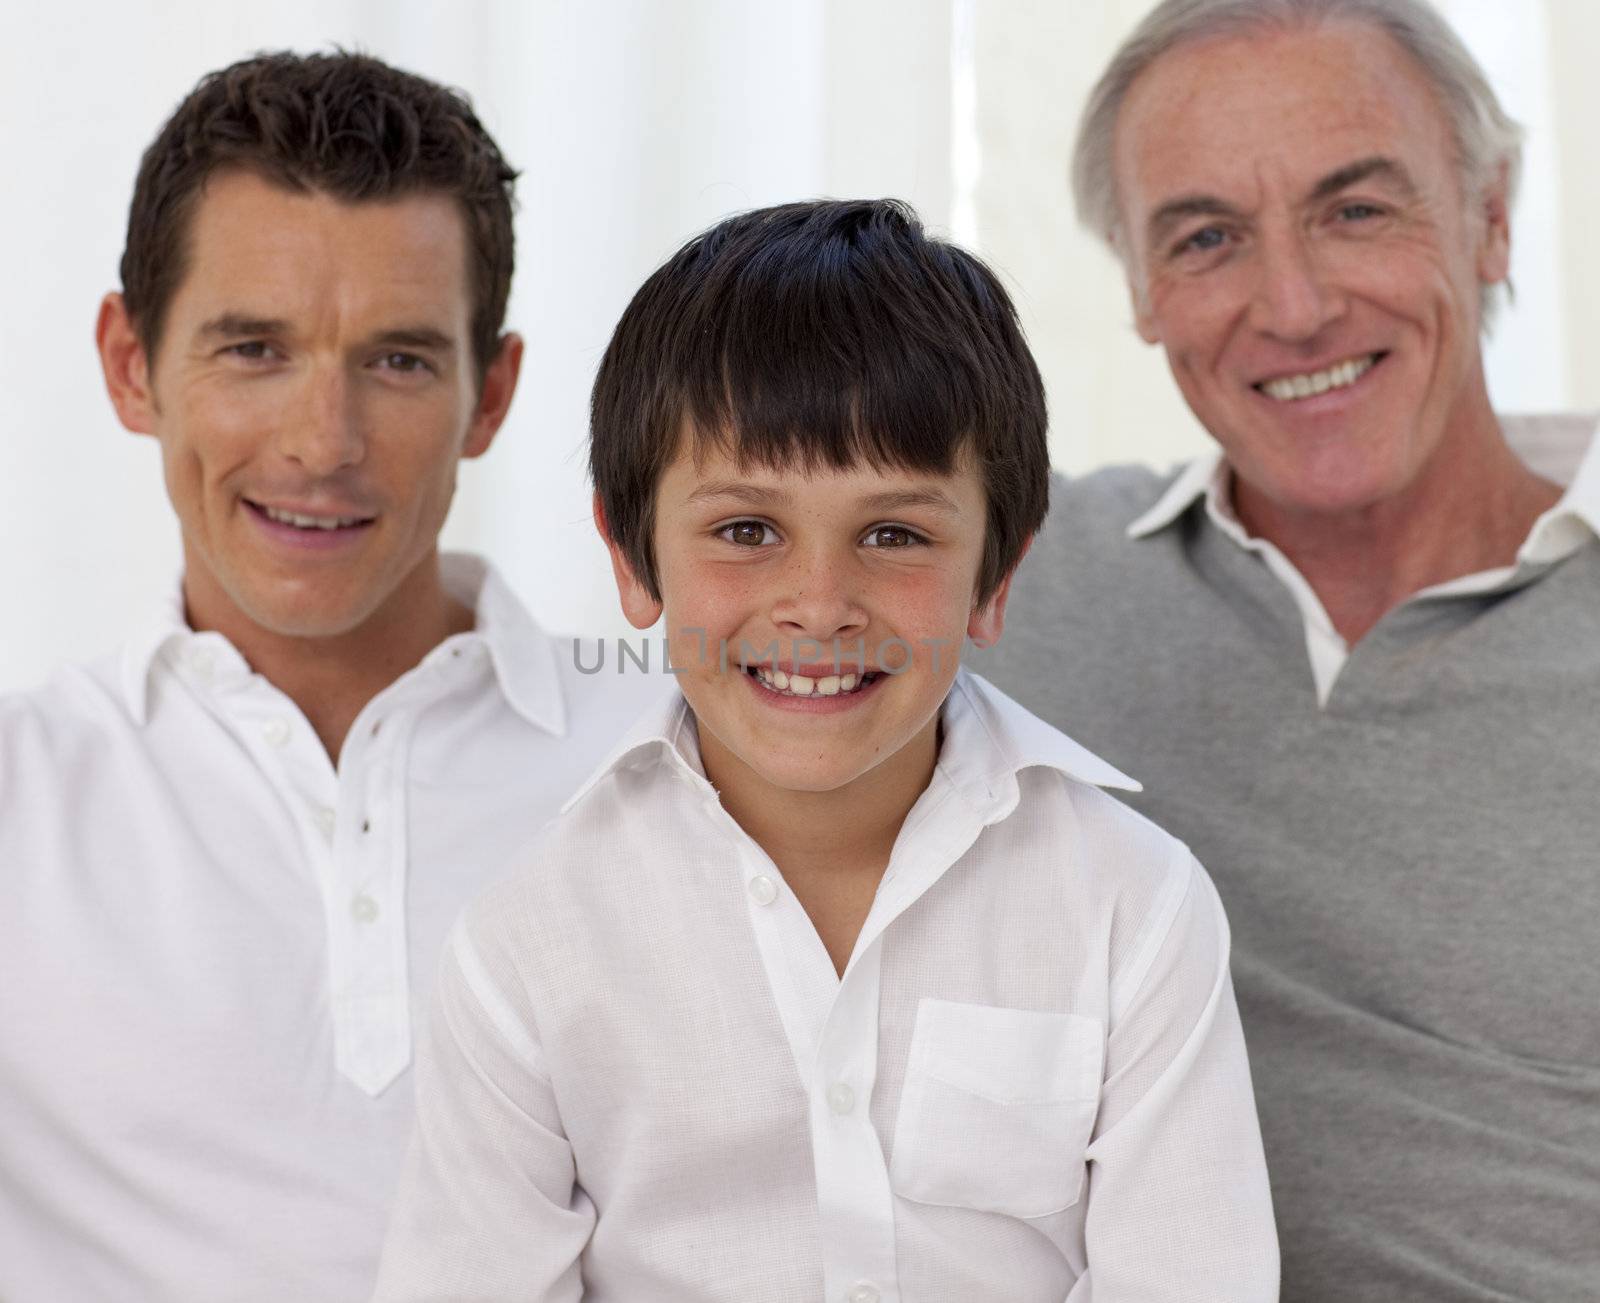 Smiling son, father and grandfather by Wavebreakmedia